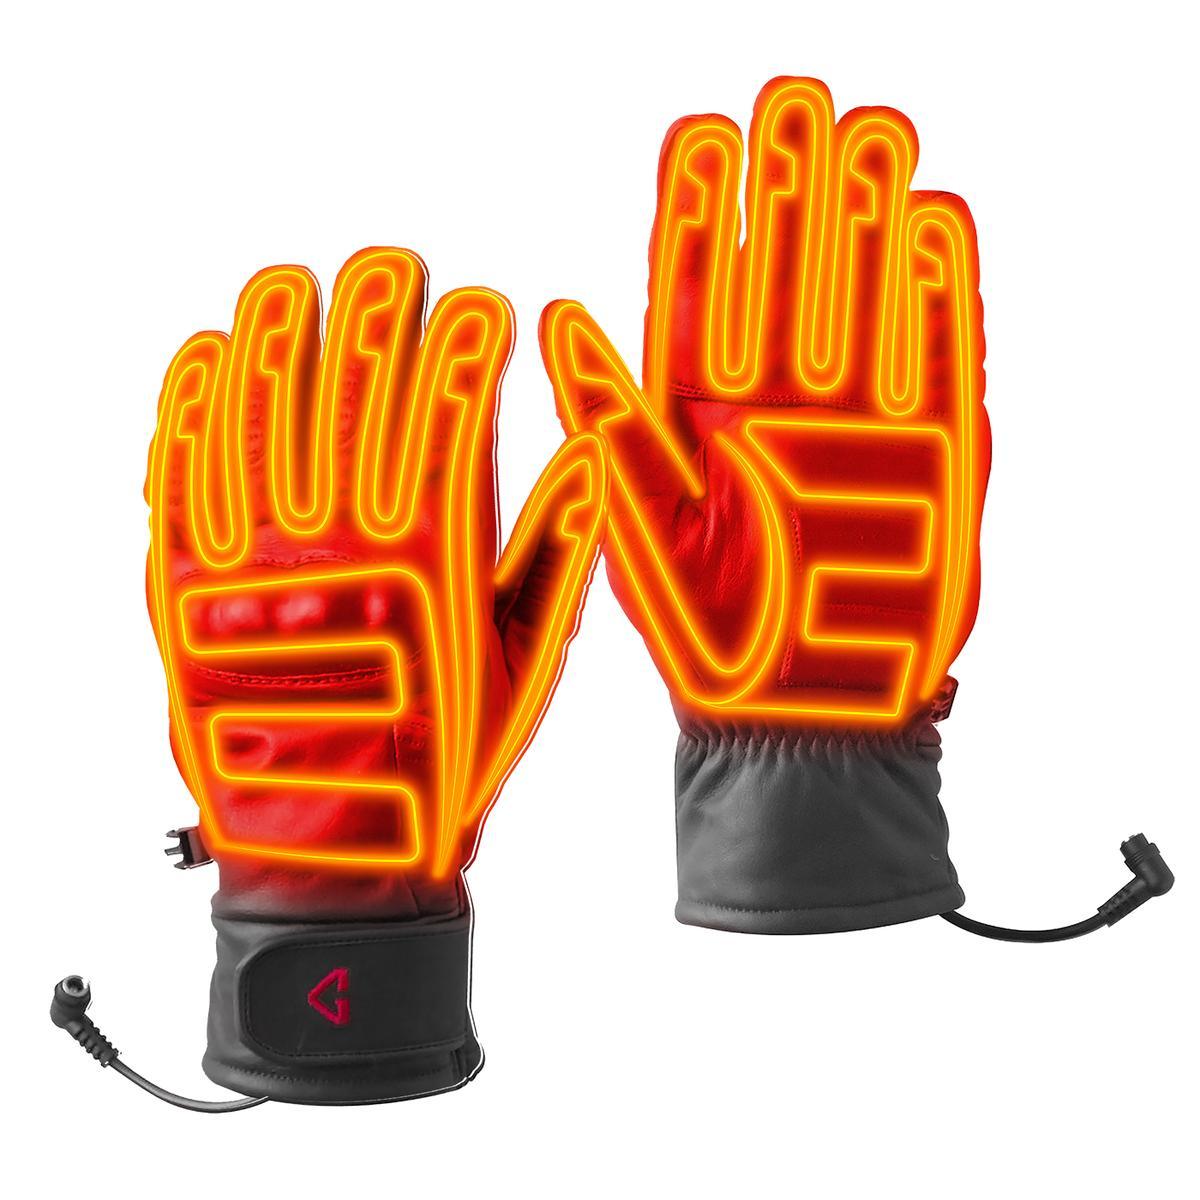 Open Box Gerbing Hero Heated Gloves - 12V Motorcycle - Front